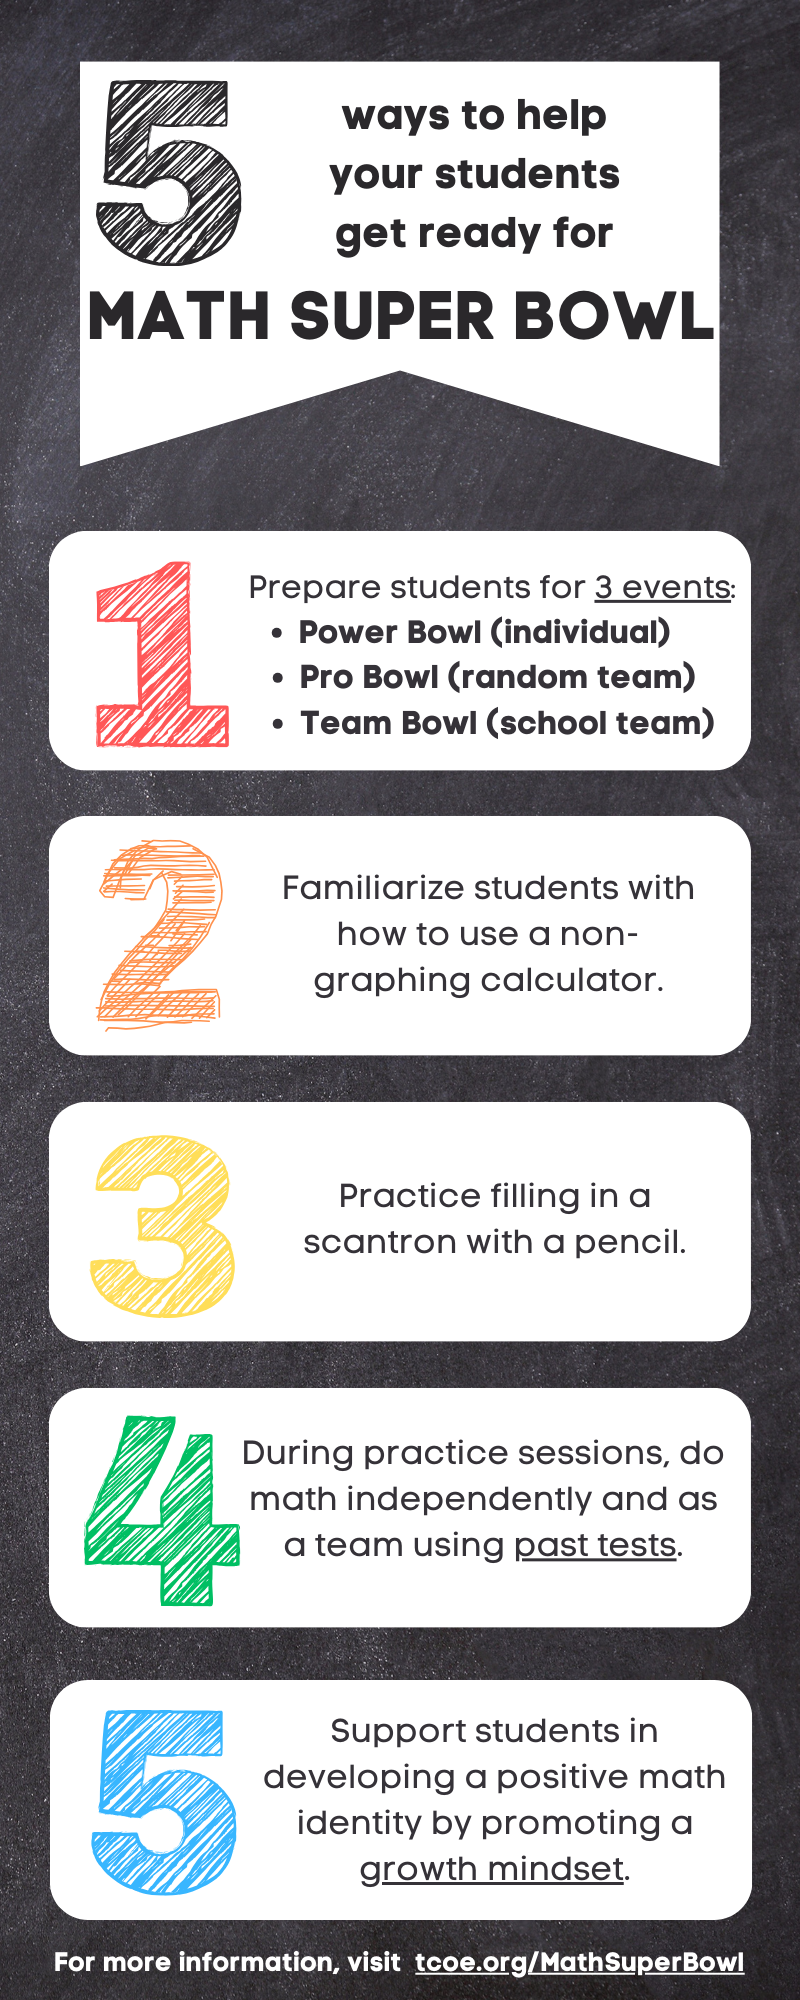 5 ways to help your students prepare for Math Super Bowl